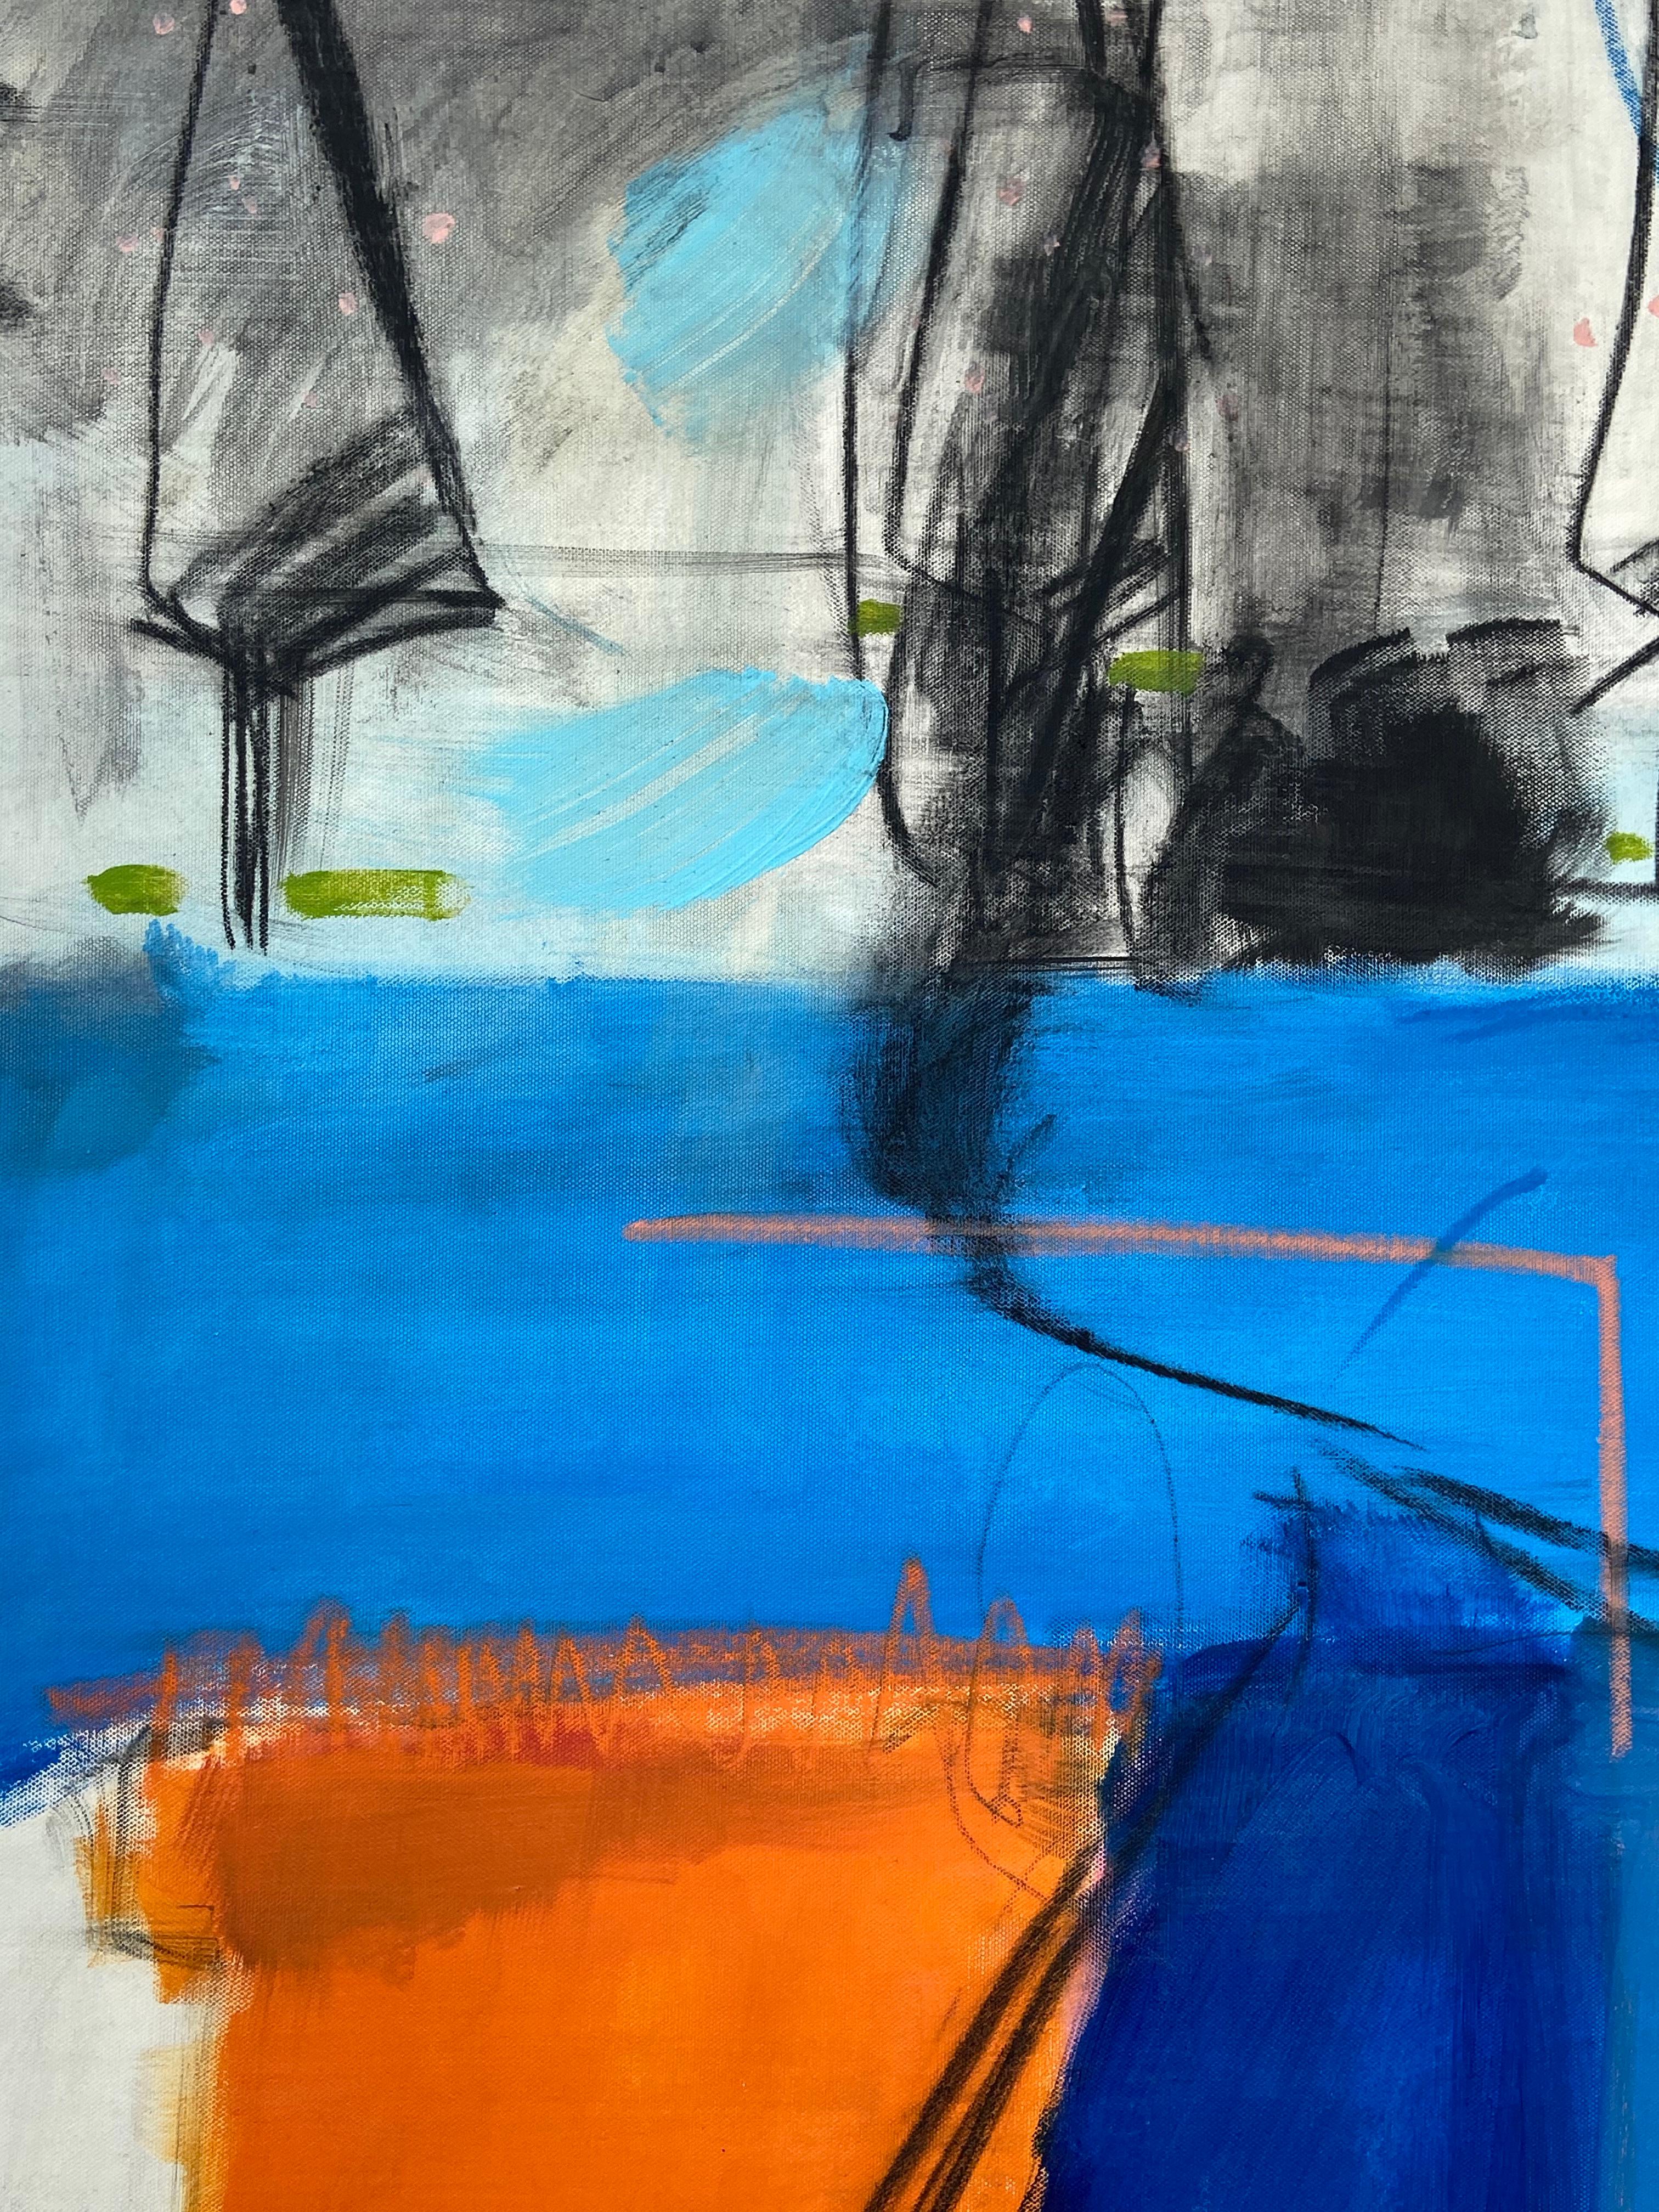 Acrylic, charcoal and oil pastel on canvas  - Unframed.

Artwork exclusive to IdeelArt.

Adrienn Krahl’s paintings express a profound sense of drama and emotional weight. Krahl works in a range of mediums, including acrylics, charcoal and ink,